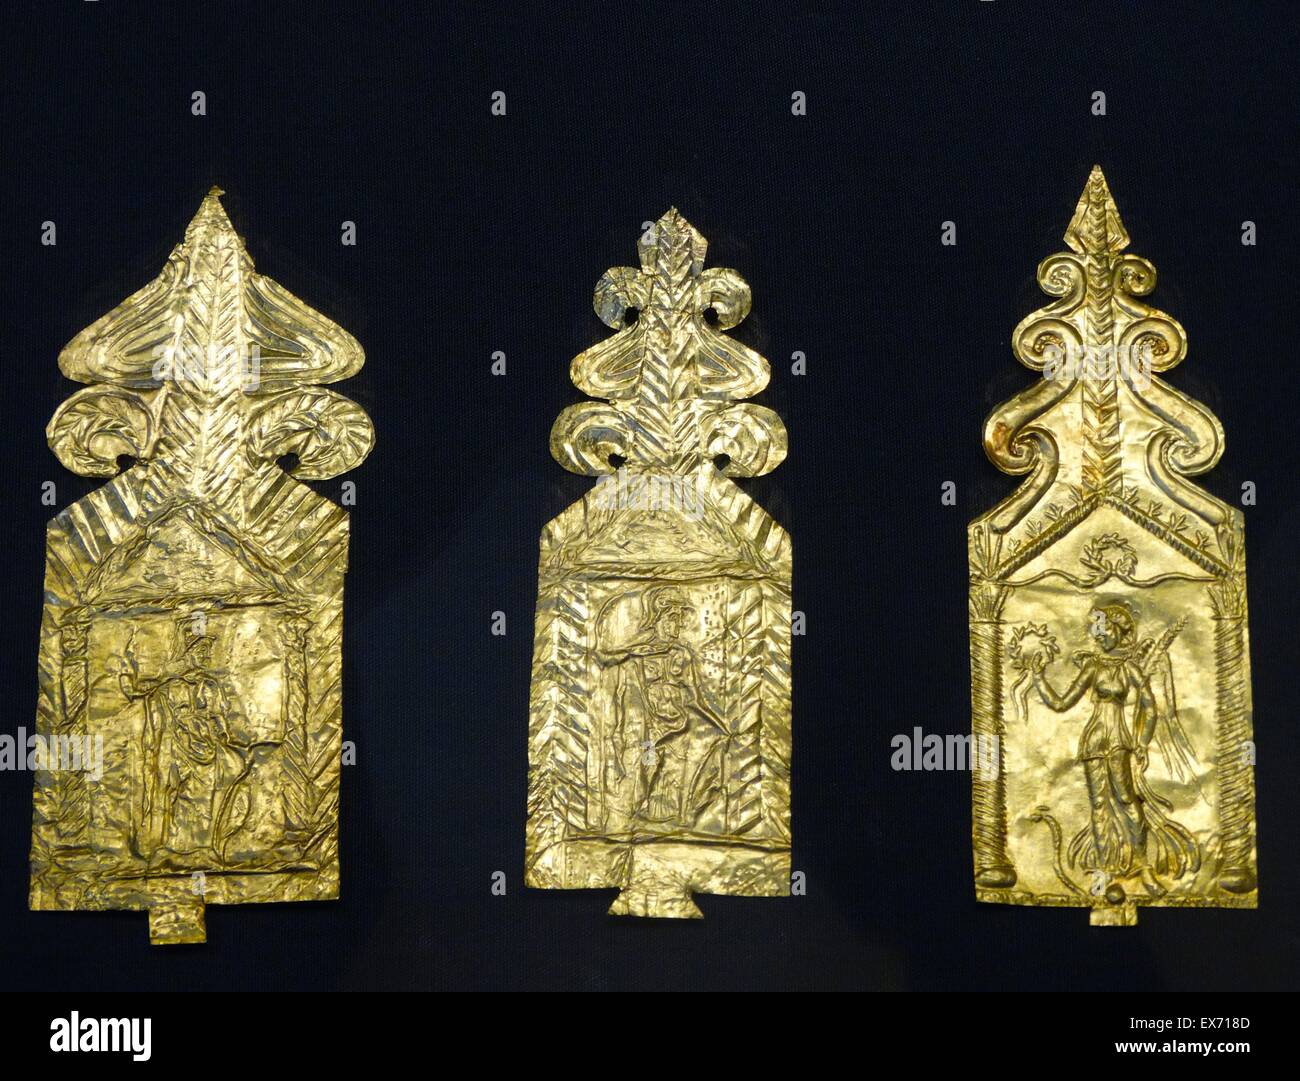 Gold votive plaques from the Roman Empire. 2nd century AD Stock Photo